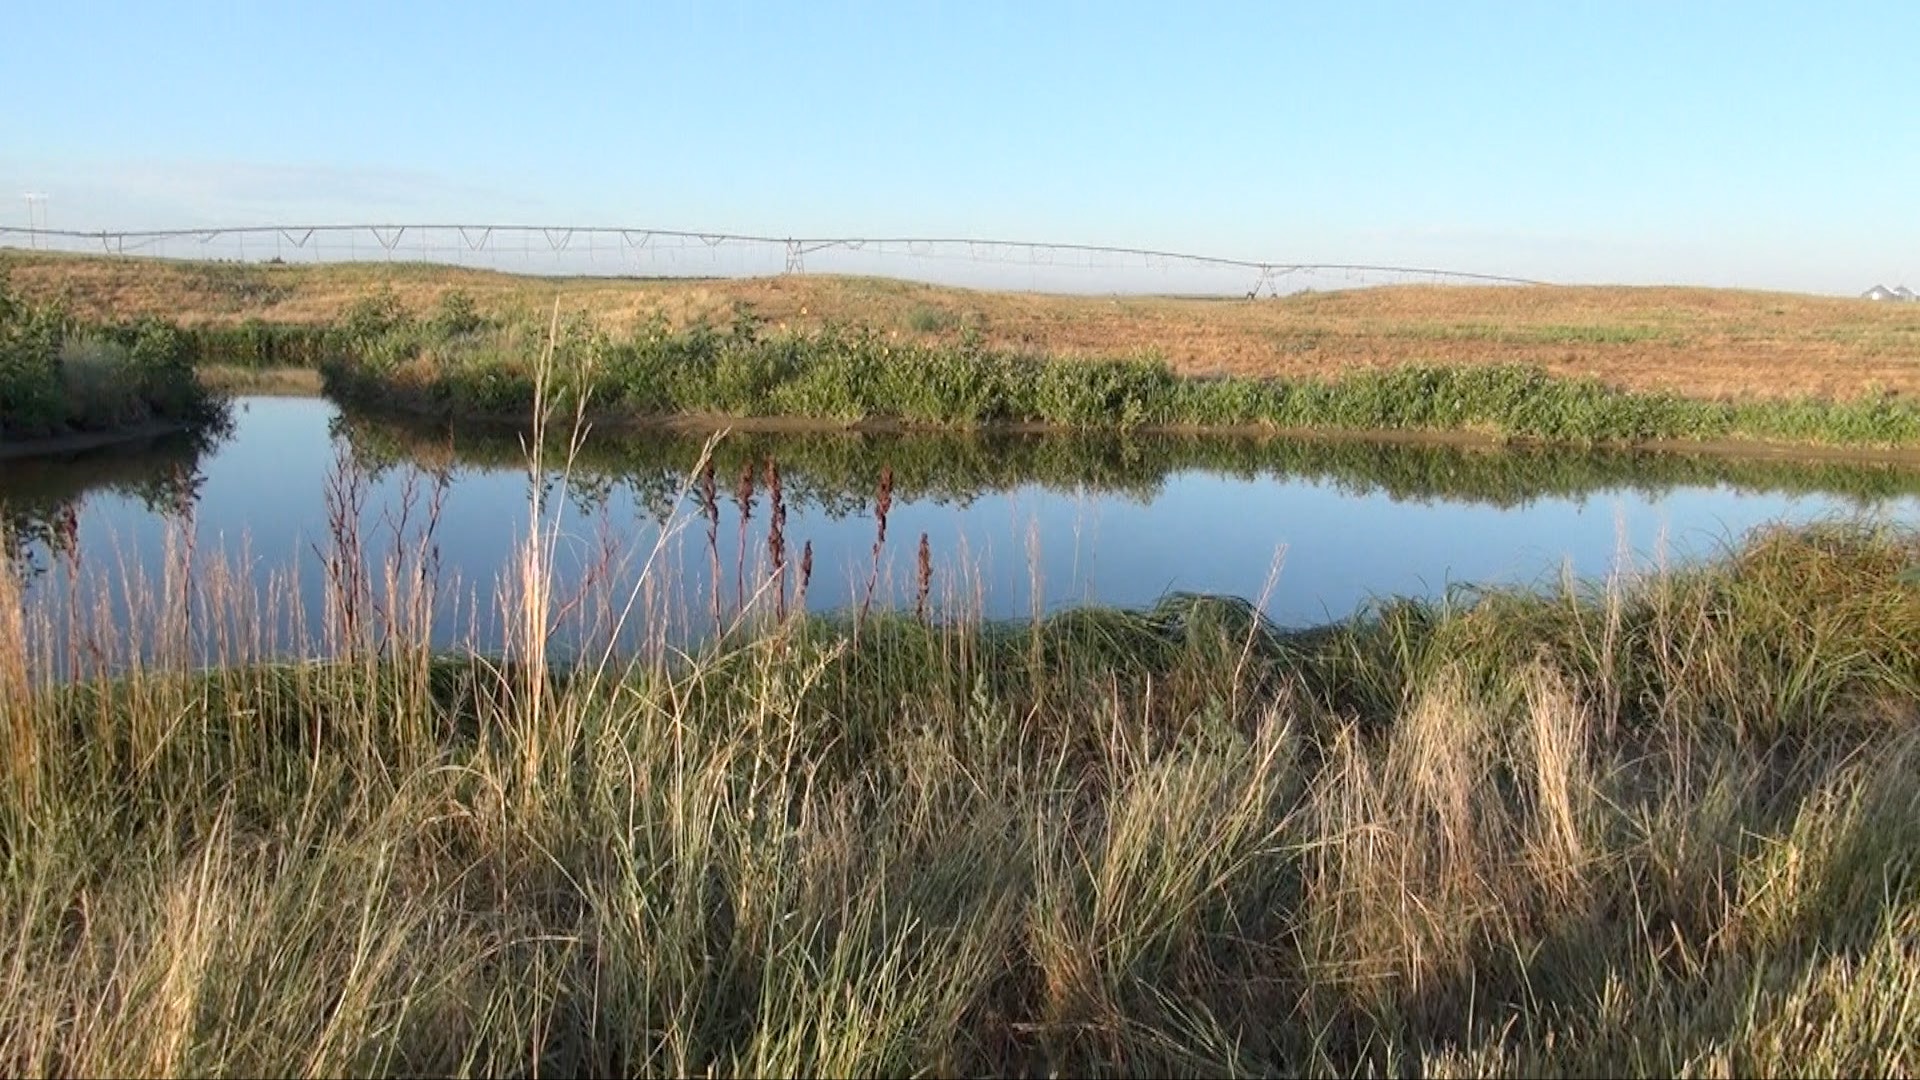 In this wet summer this recharge pond near Sterling still has water